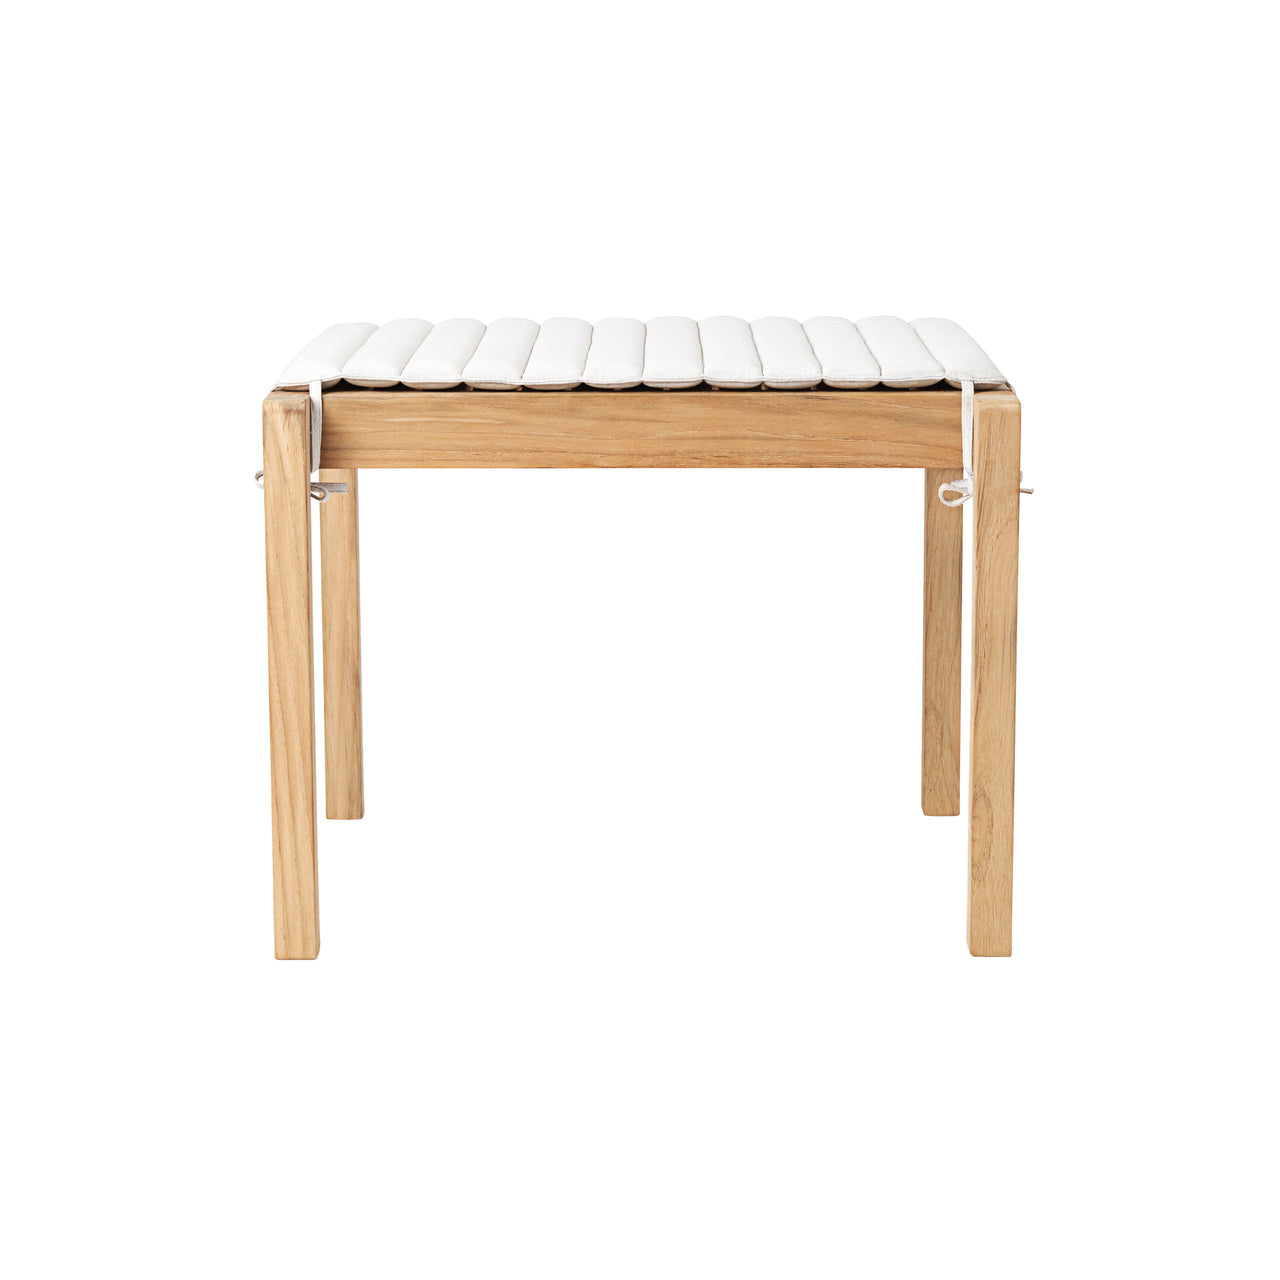 AH911 Outdoor Side Table: With Cushion